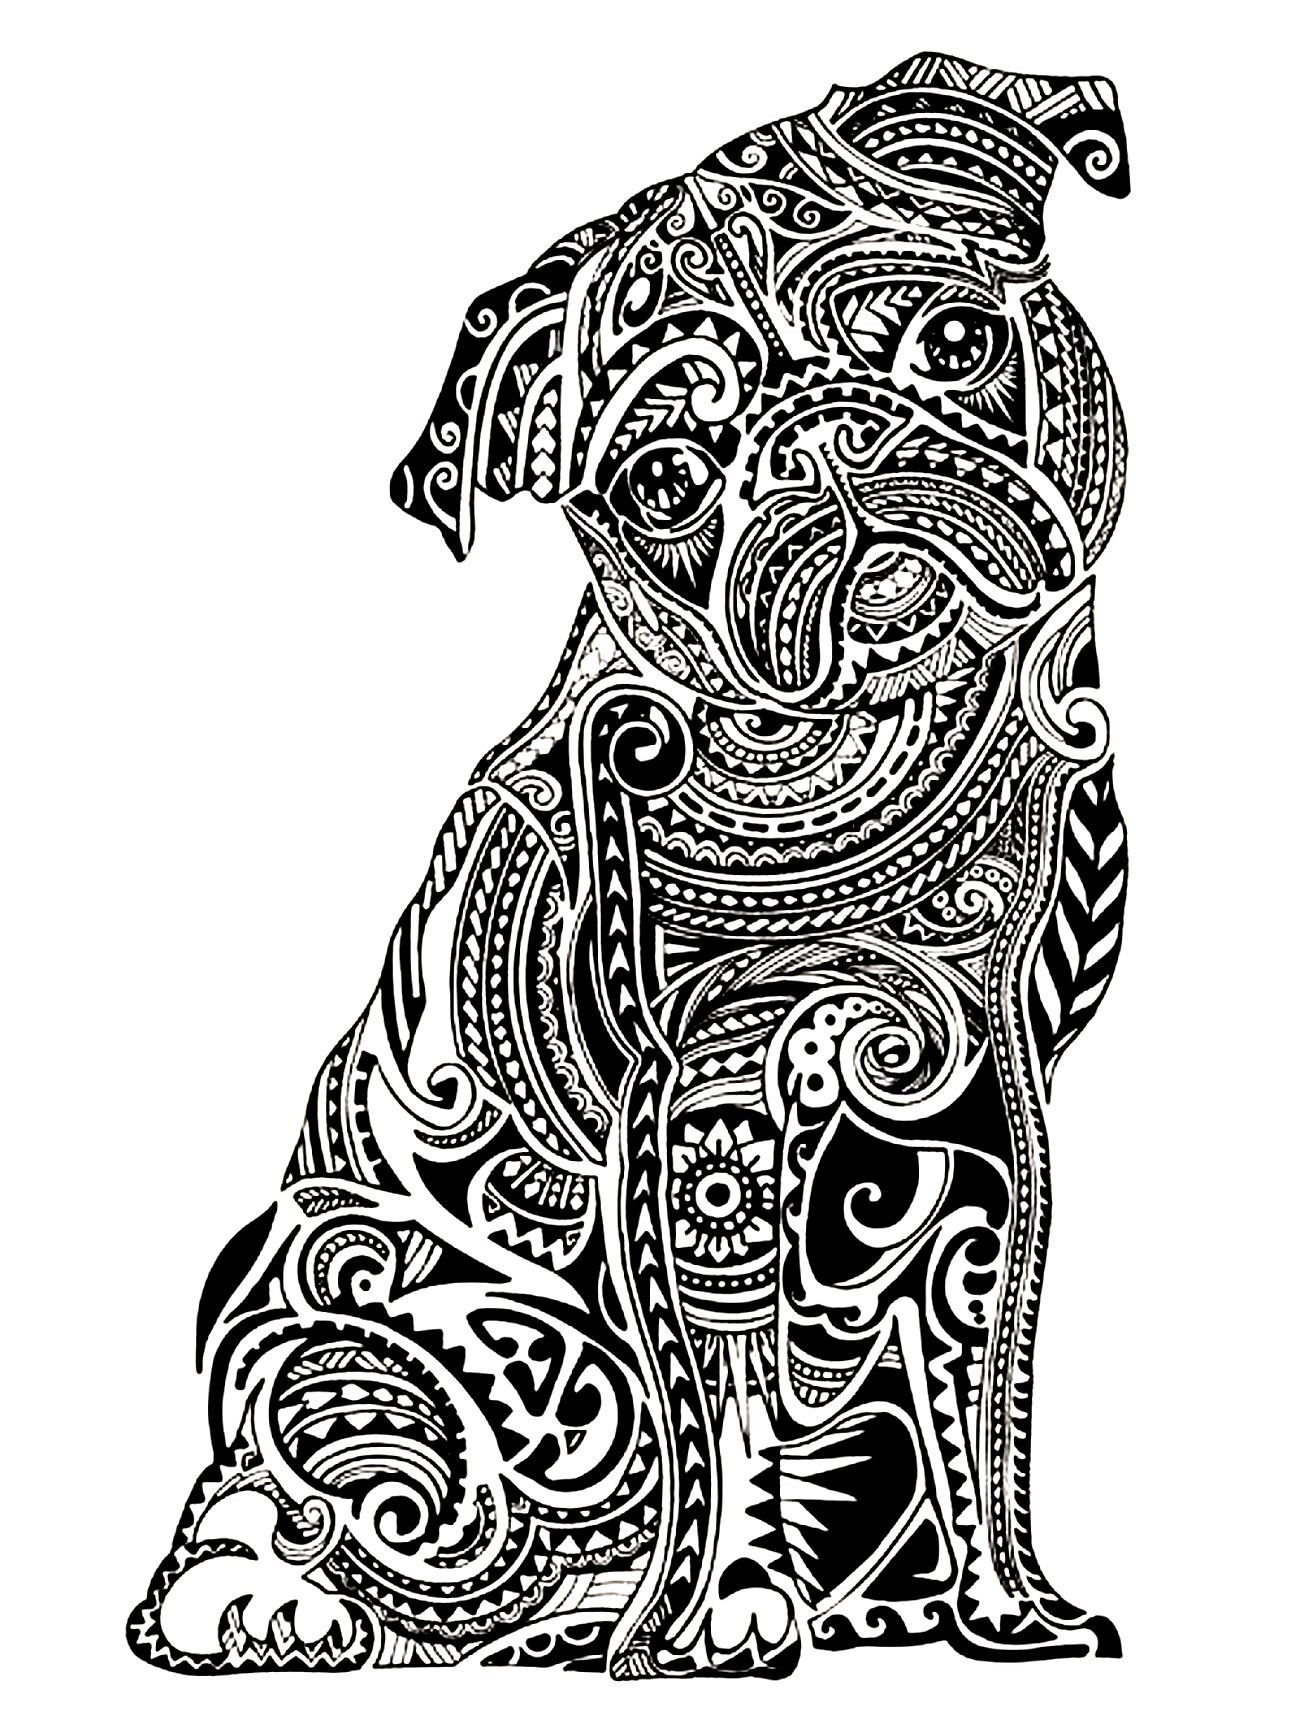 Coloring Pages For Adults Difficult Animals
 Animals Coloring pages for adults coloring adult